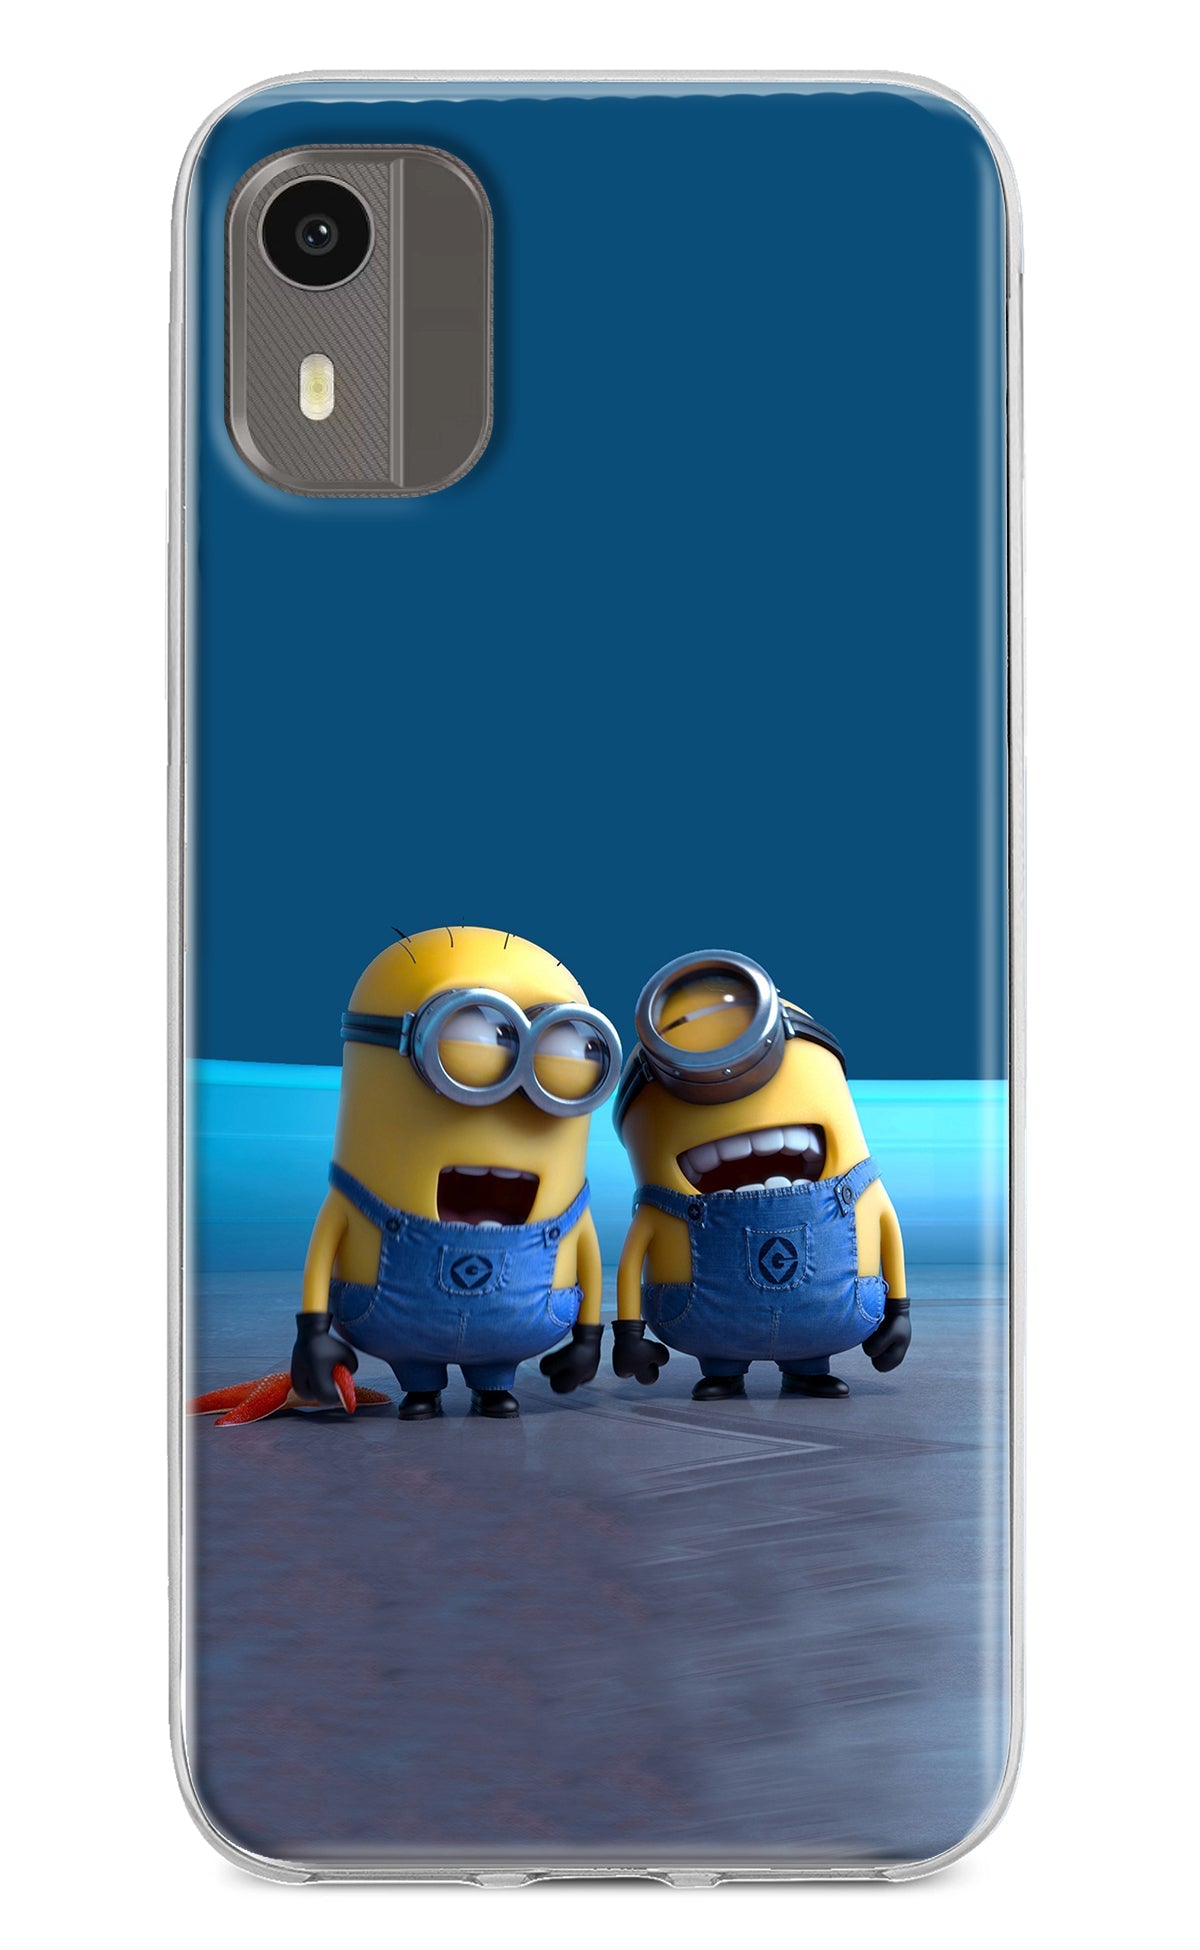 Minion Laughing Nokia C12/C12 Pro Back Cover